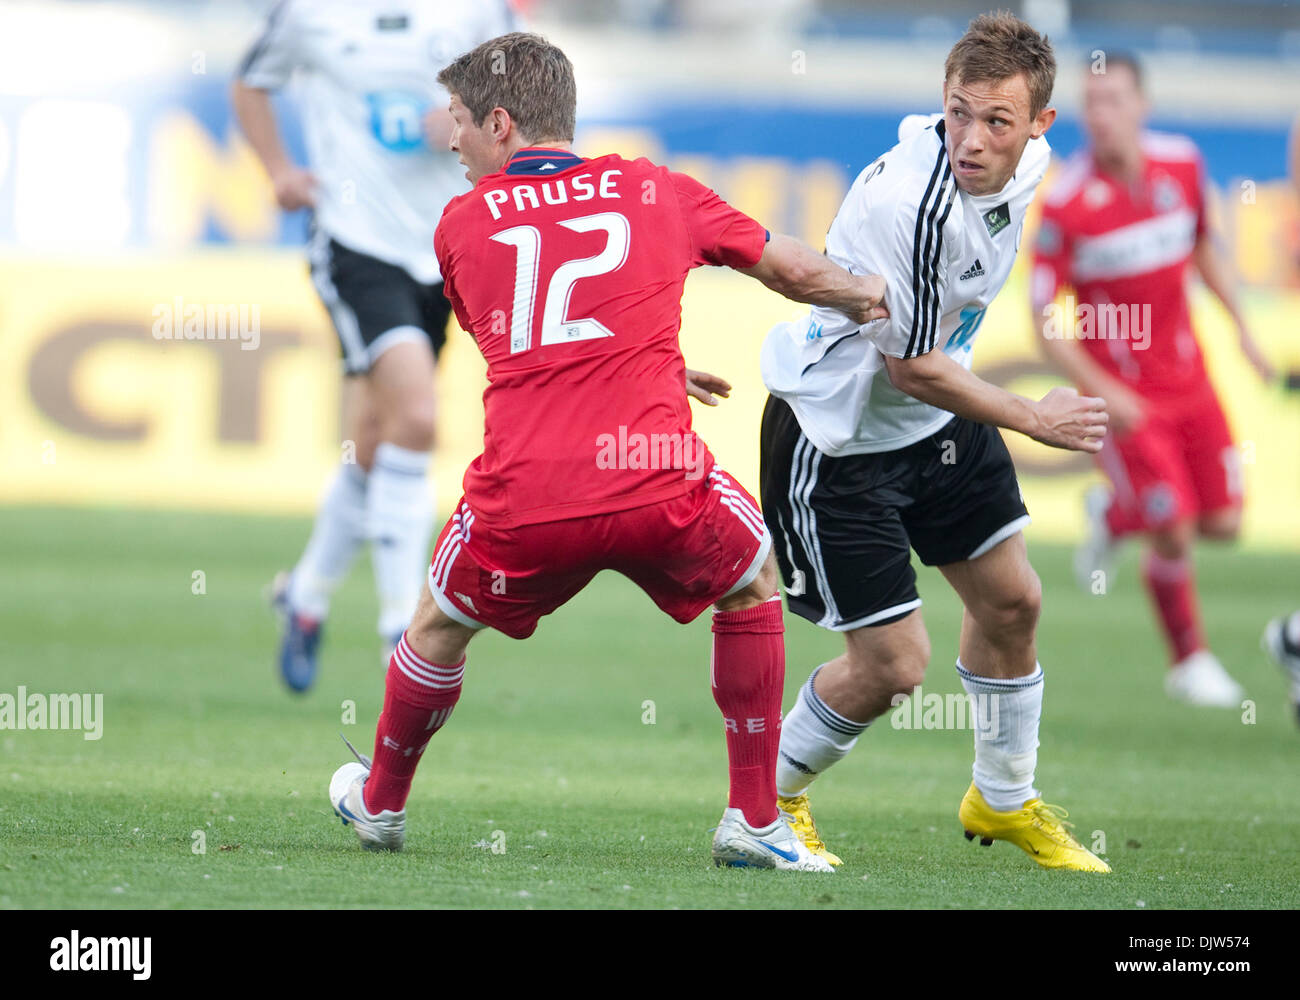 Legia Warsaw Midfielder Maciej Rybus (#31) and Chicago Fire Defenseman Logan Pause (#12) in game action between Legia Warsaw and the Chicago Fire at Toyota Park in Bridgeview, Illinois.  Legia Warsaw defeated the Chicago Fire 3-0. (Credit Image: © John Mersits/Southcreek Global/ZUMApress.com) Stock Photo